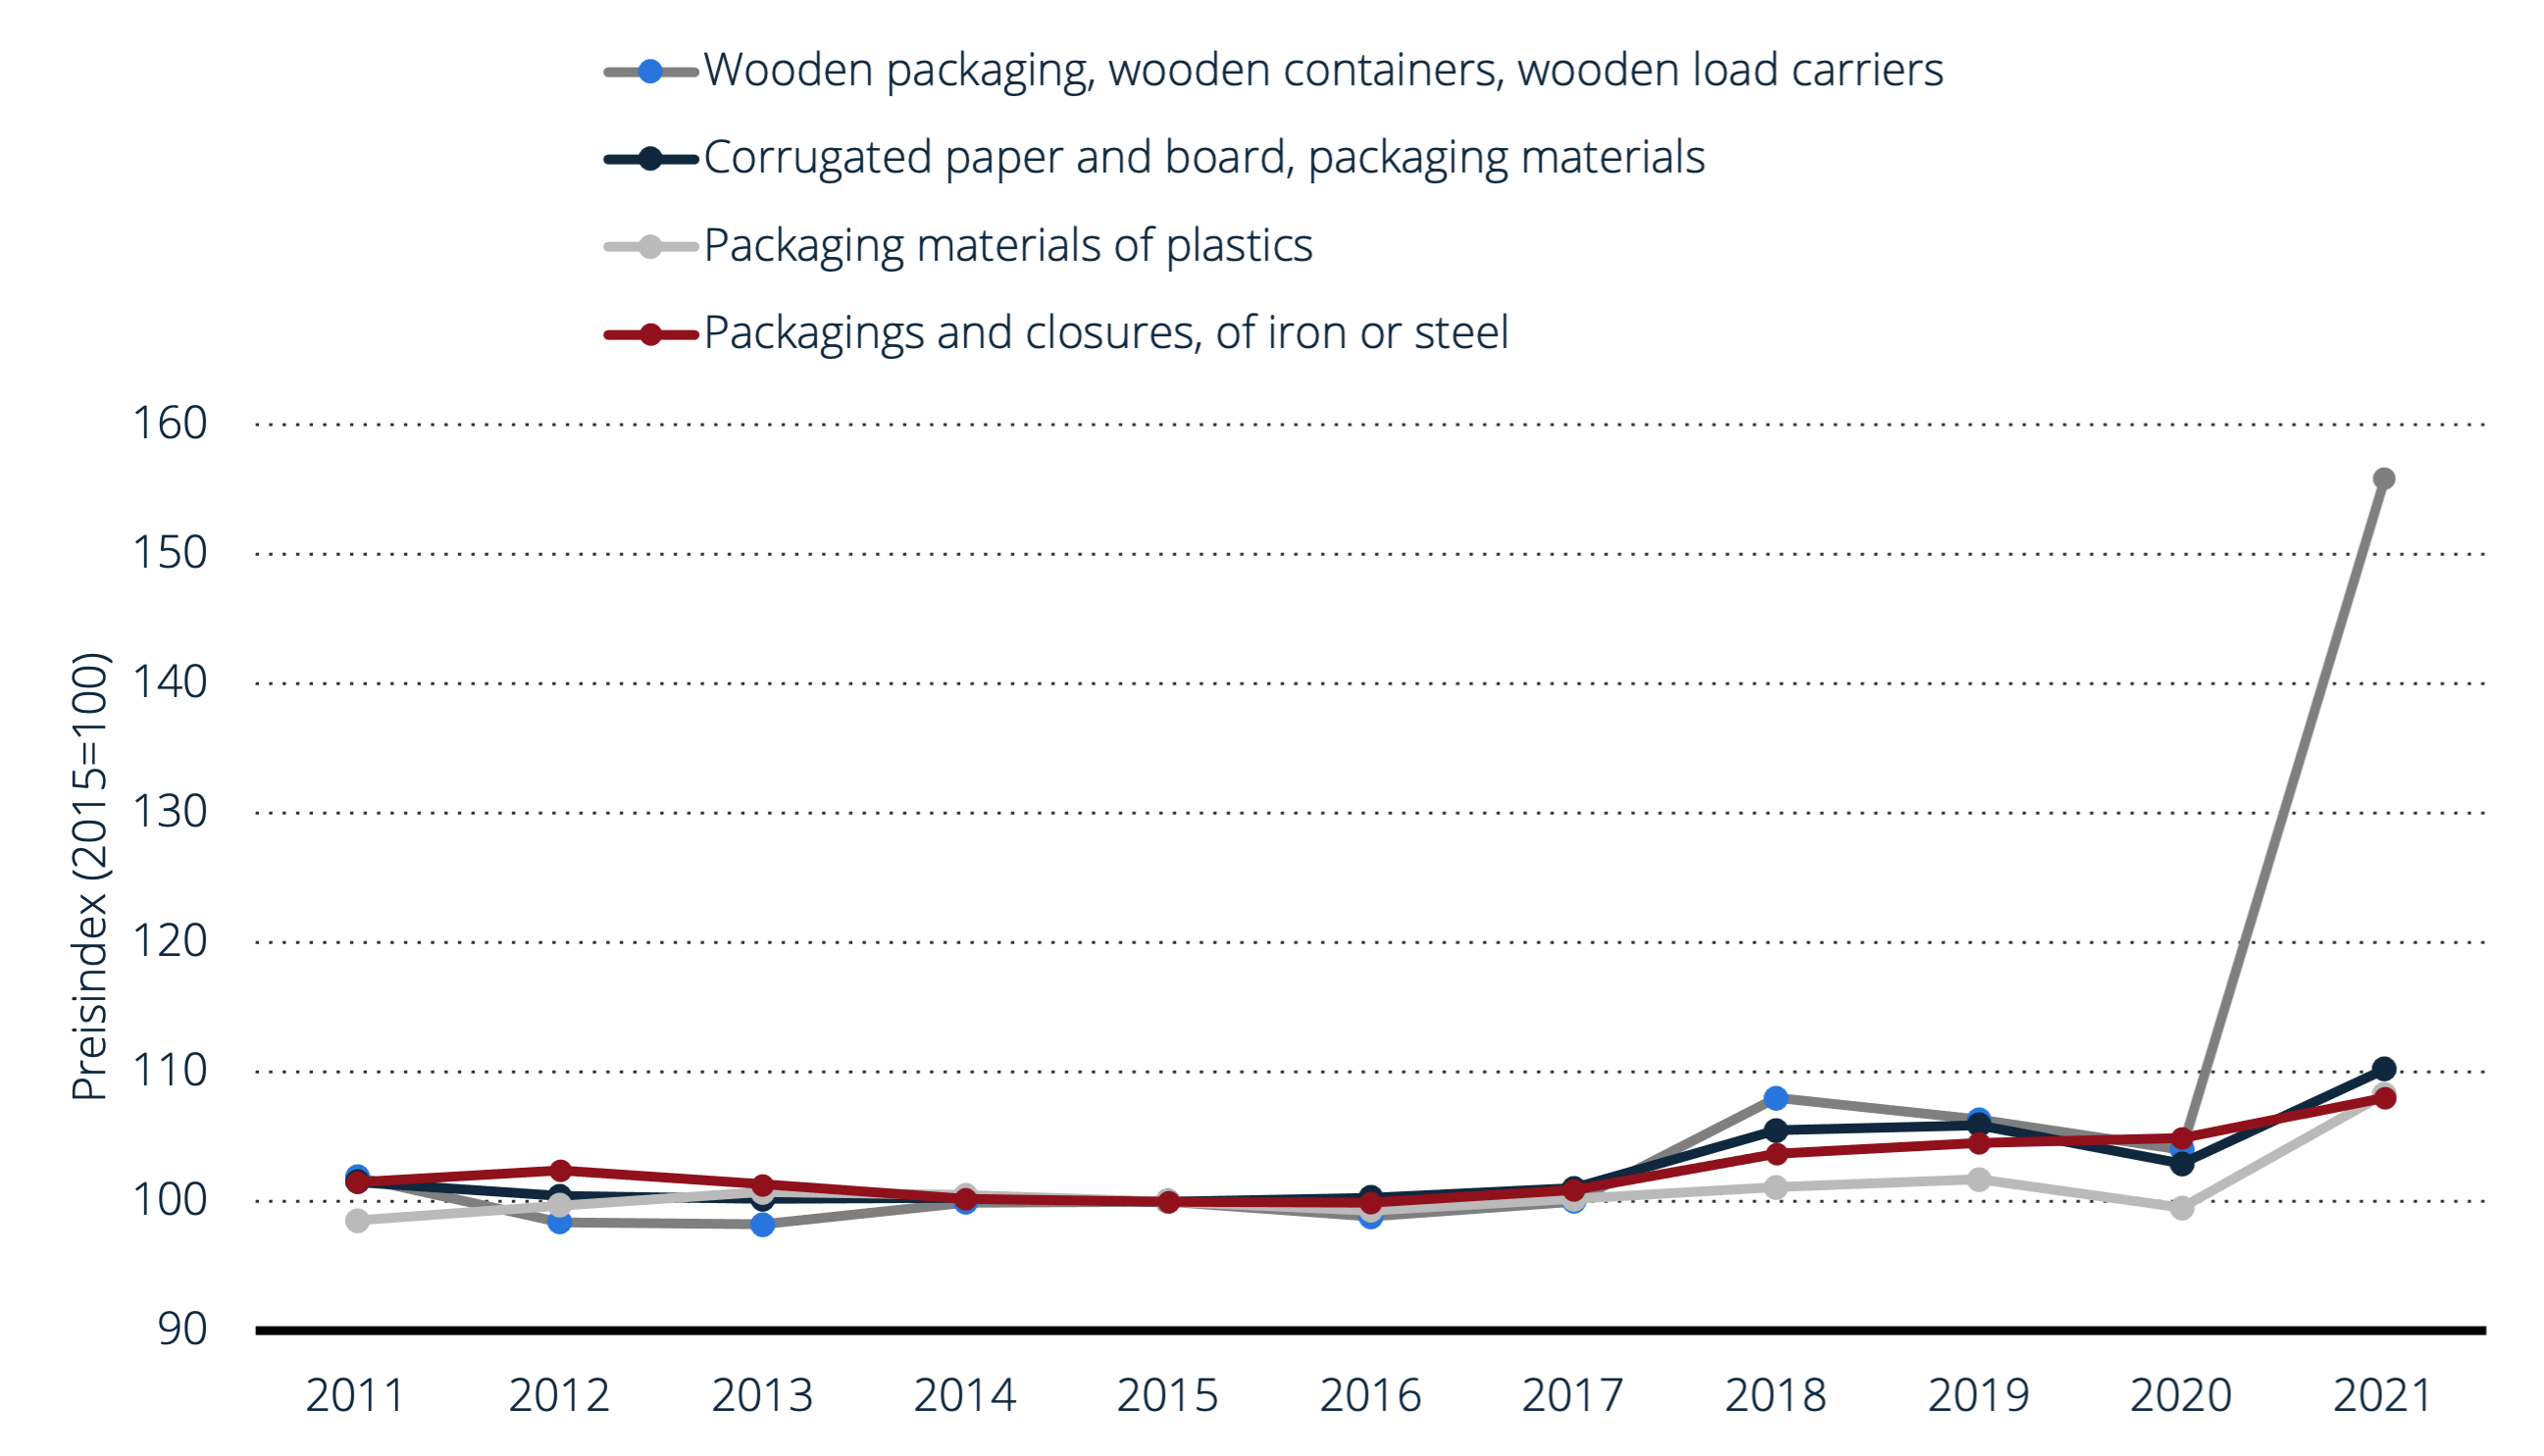 Producer price index of packaging